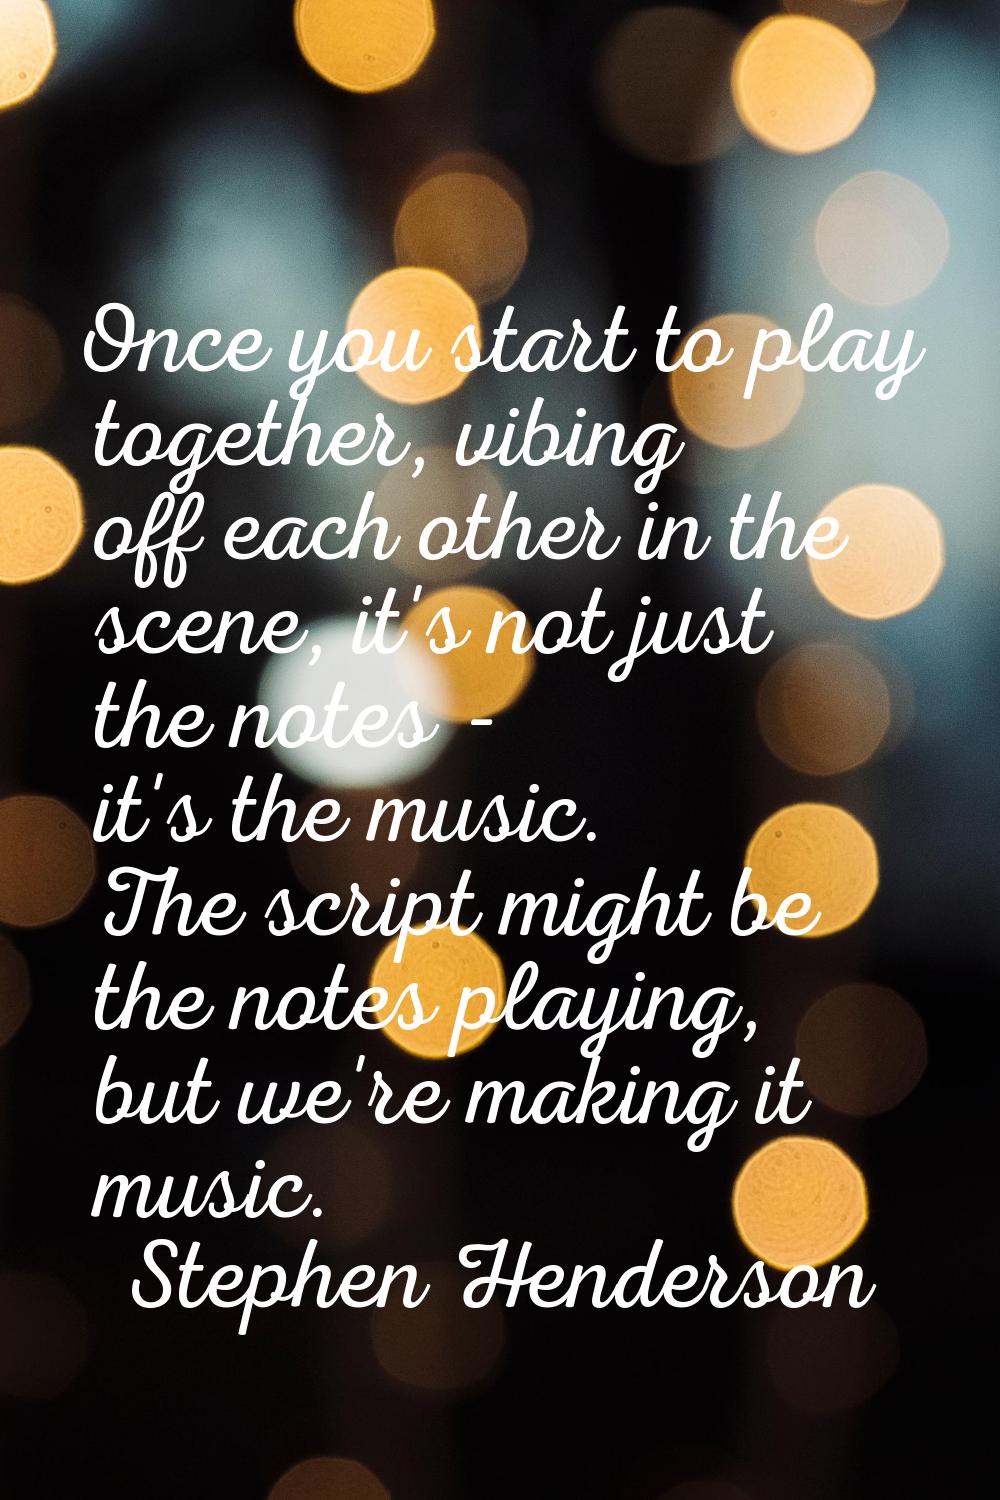 Once you start to play together, vibing off each other in the scene, it's not just the notes - it's